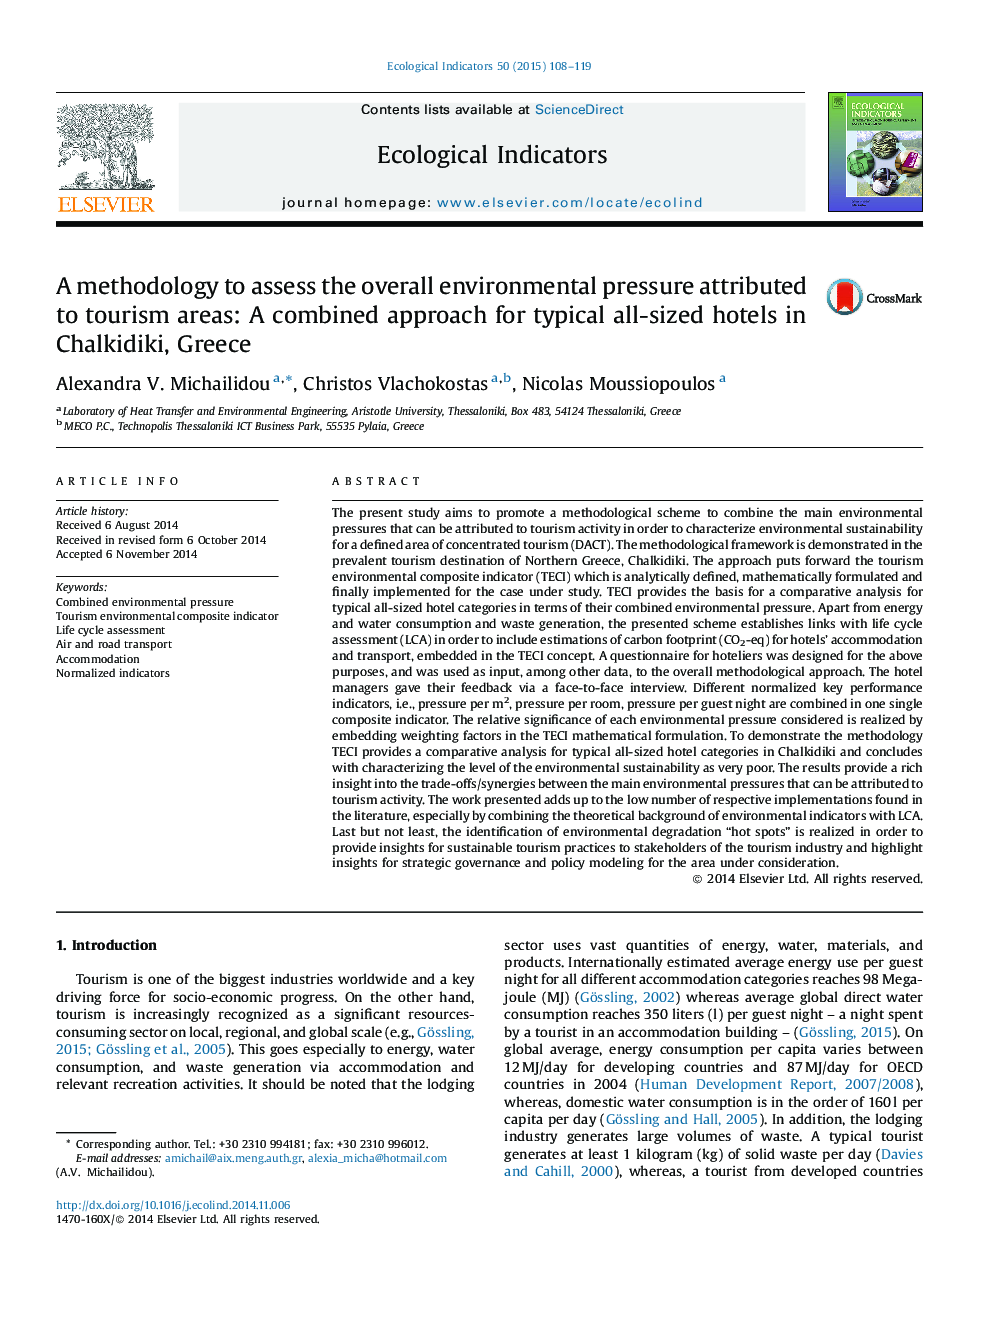 A methodology to assess the overall environmental pressure attributed to tourism areas: A combined approach for typical all-sized hotels in Chalkidiki, Greece